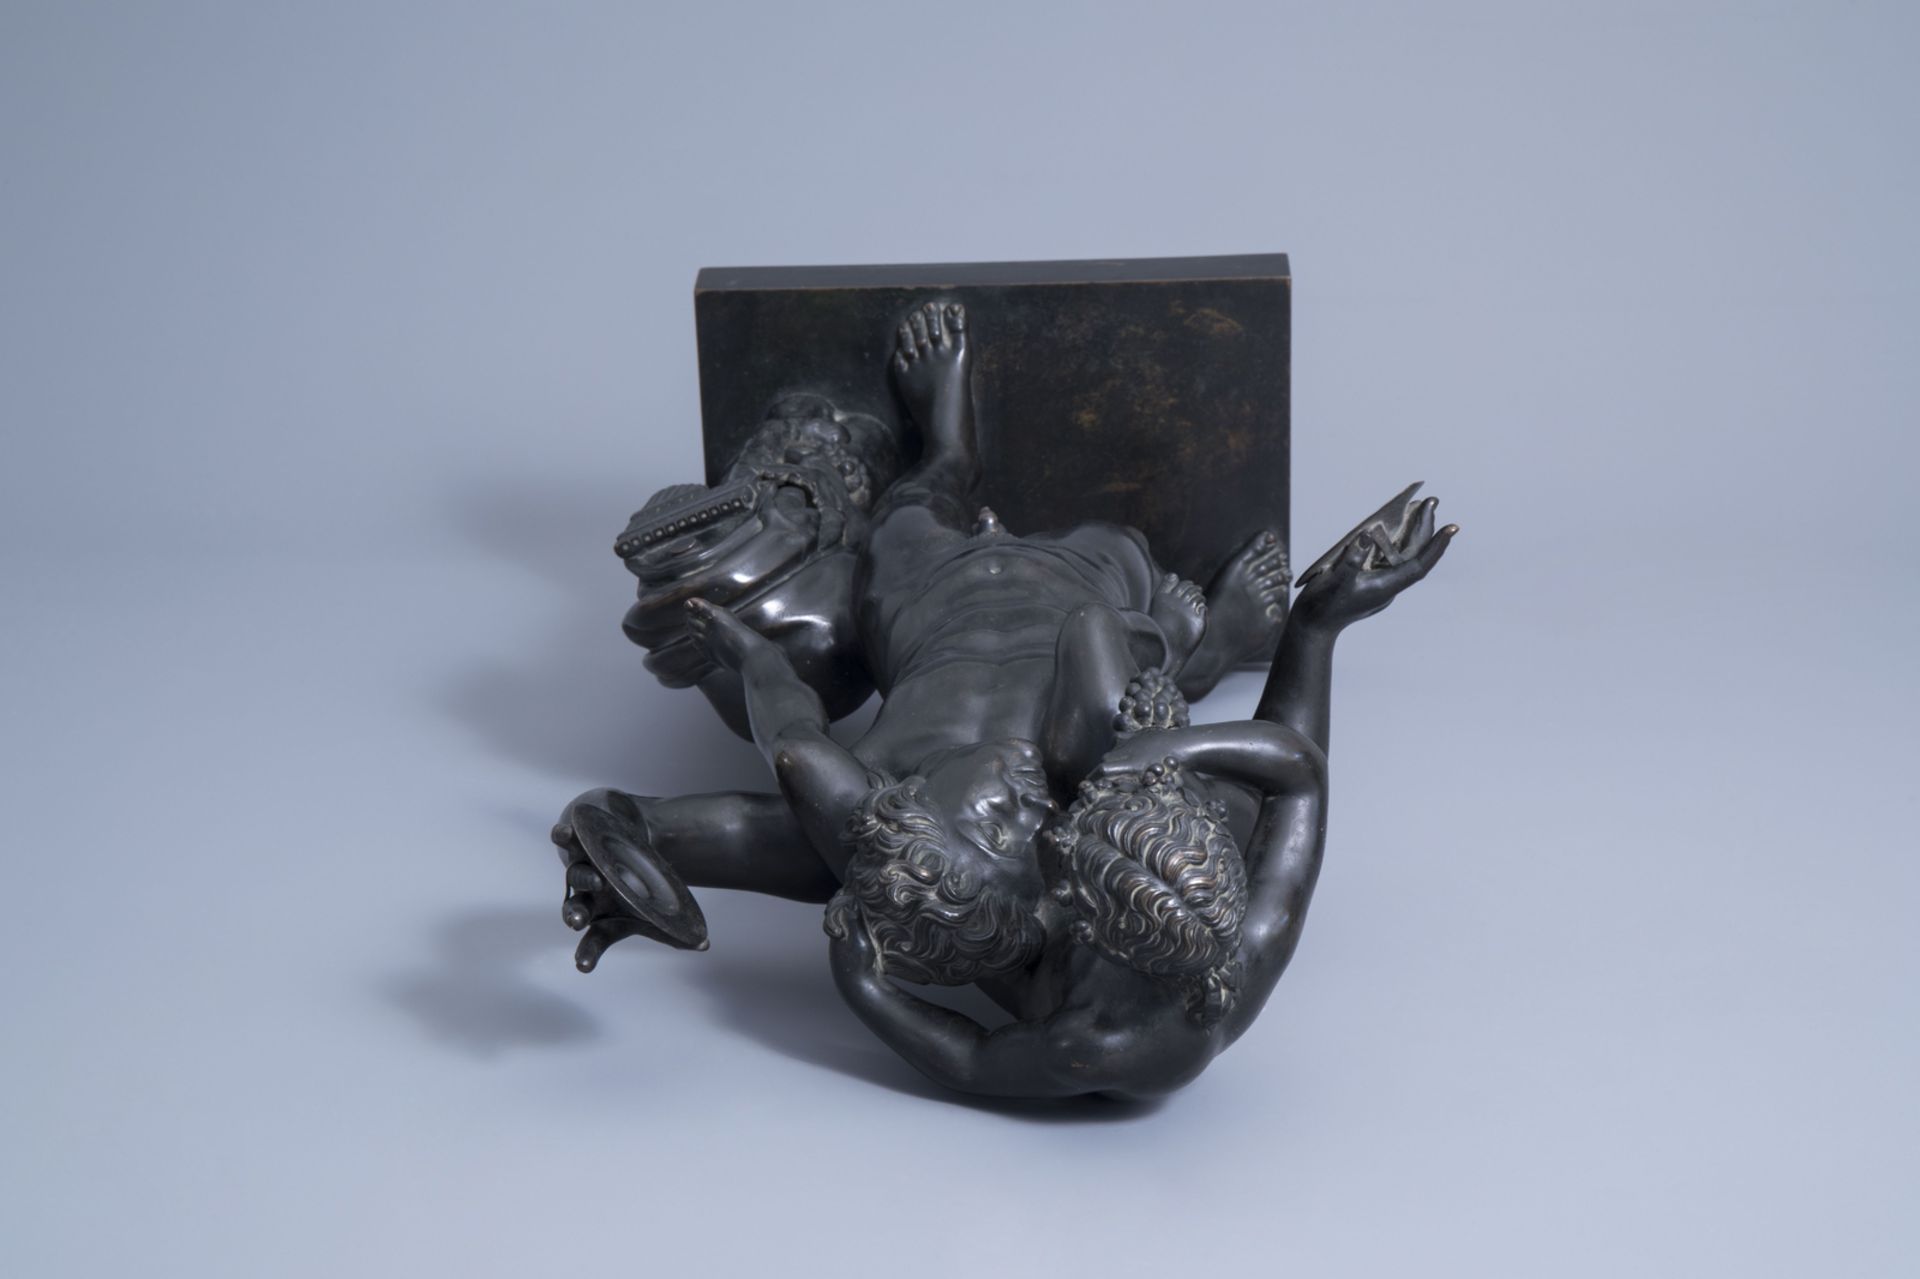 Sabatino de Angelis (1838-?): Young Bacchus and a faun making merry, patinated bronze, dated 1907 - Image 8 of 8